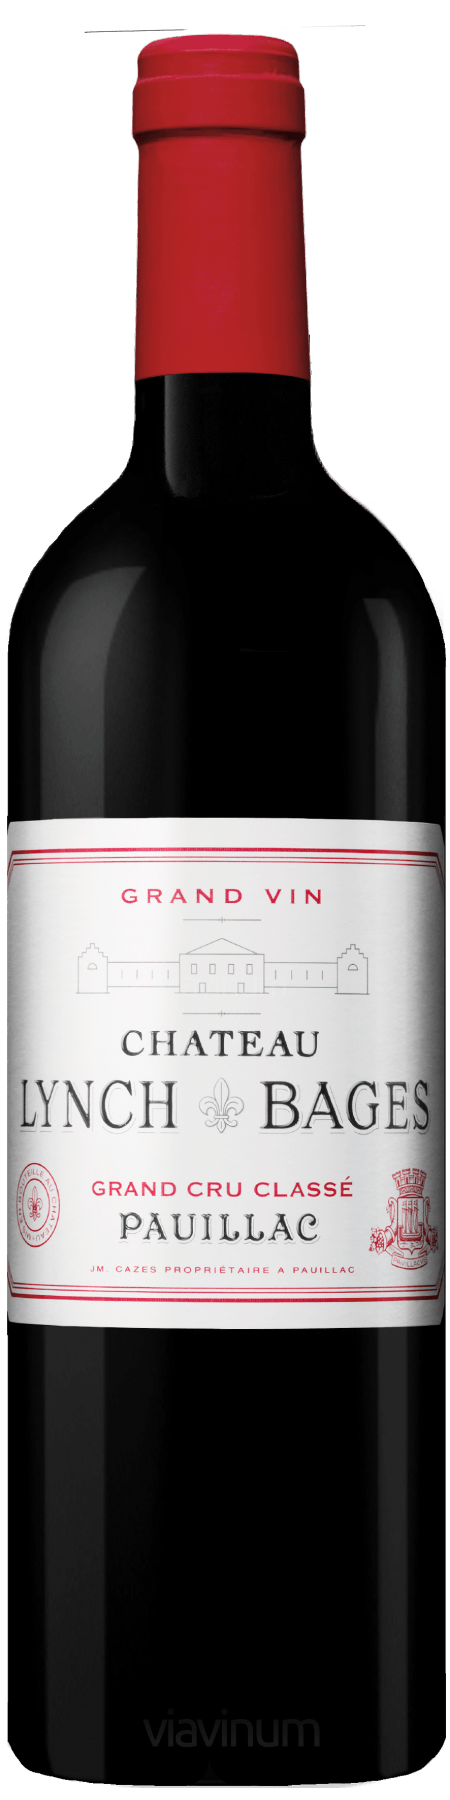 CHT LYNCH BAGES 2009  75CL